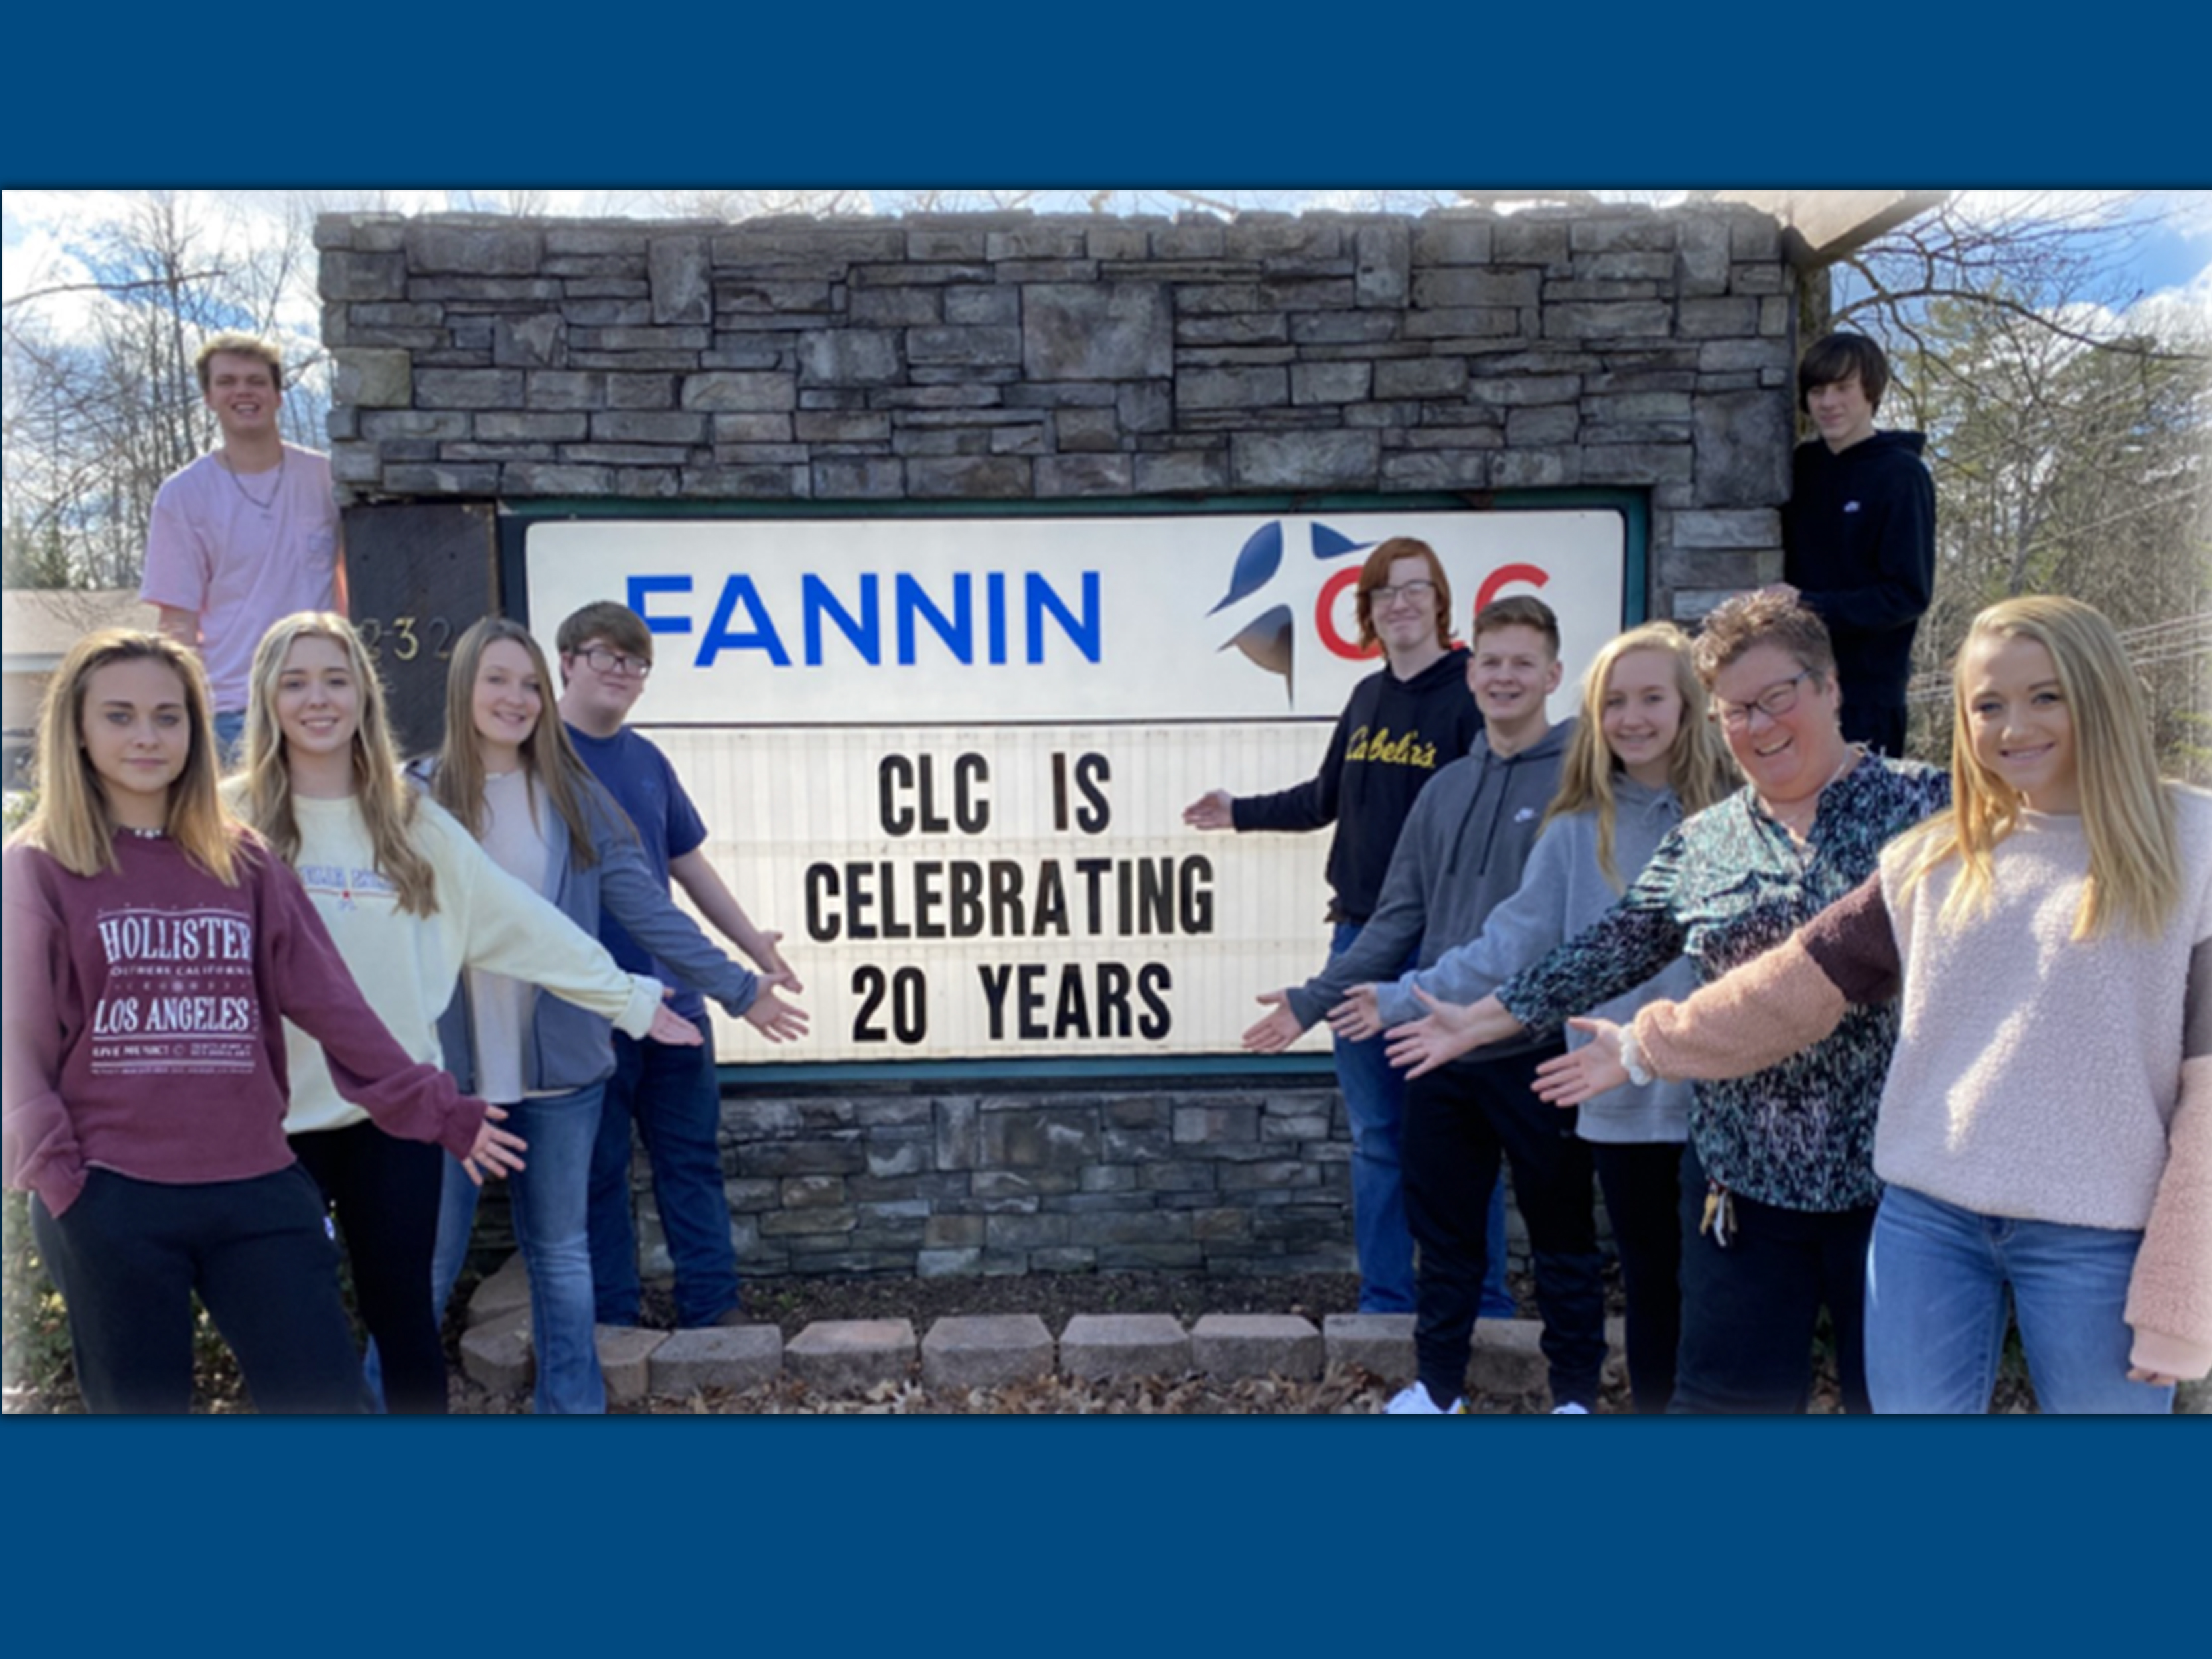 The Fannin Christian Learning Center is gearing up for its annual winter banquet fundraiser as they celebrate their 20th year of teaching the Bible to the youth of Fannin County. Shown front to back, on left, is Ansley Turner, Ella Richardson, Jaylin Ray, Gentry Clore, Blake Rogers; front to back, on right, is MacKenzie Johnson, Executive Director Tina Lee, Nicole Pittman, Jerritt Holloway, Joseph Annis and Nicolas Arp.